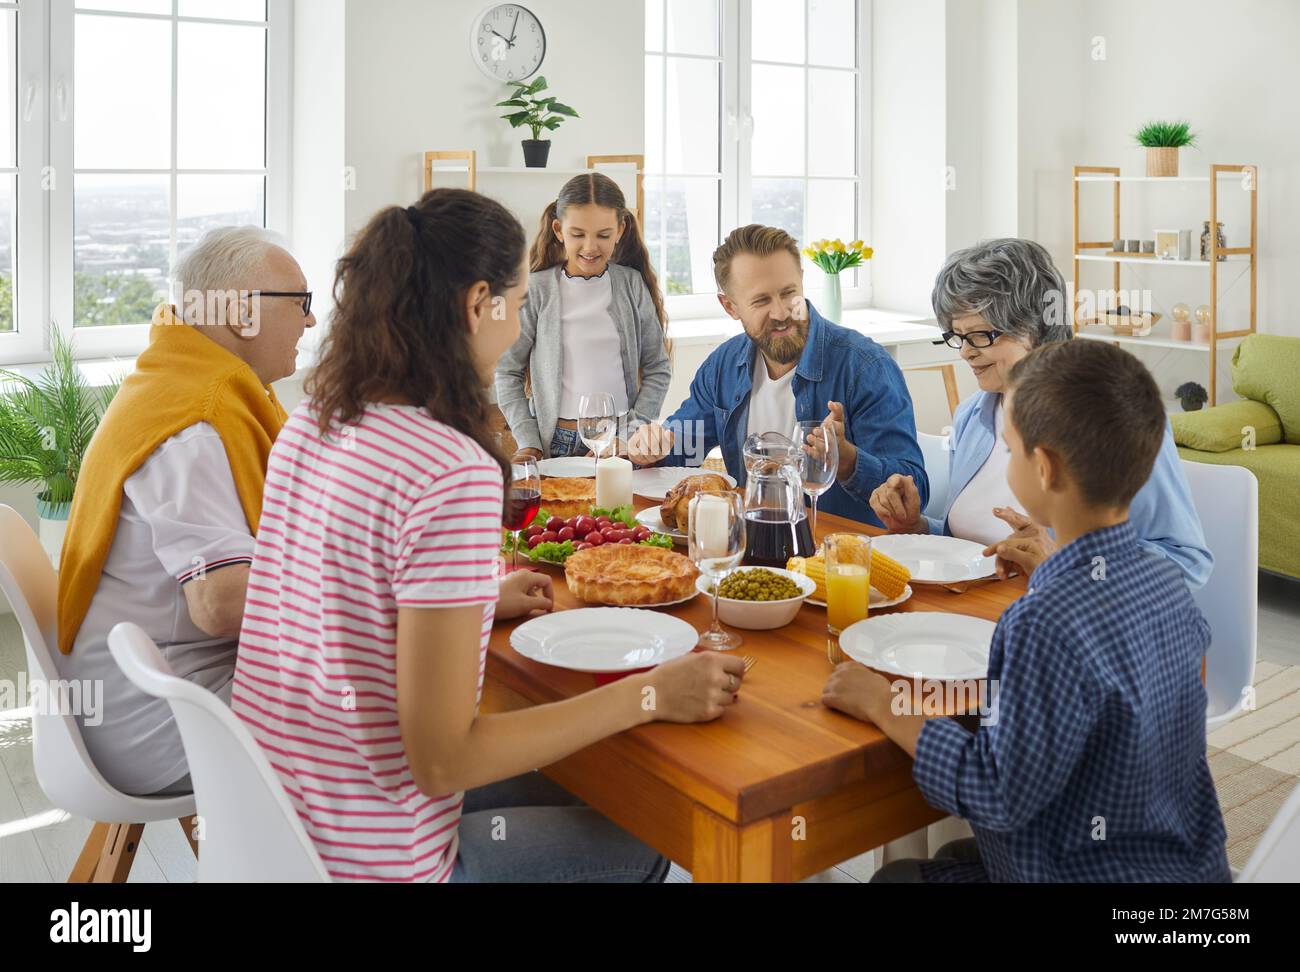 Family parents, grandparents and children having a lunch and talking together sitting at table. Stock Photo